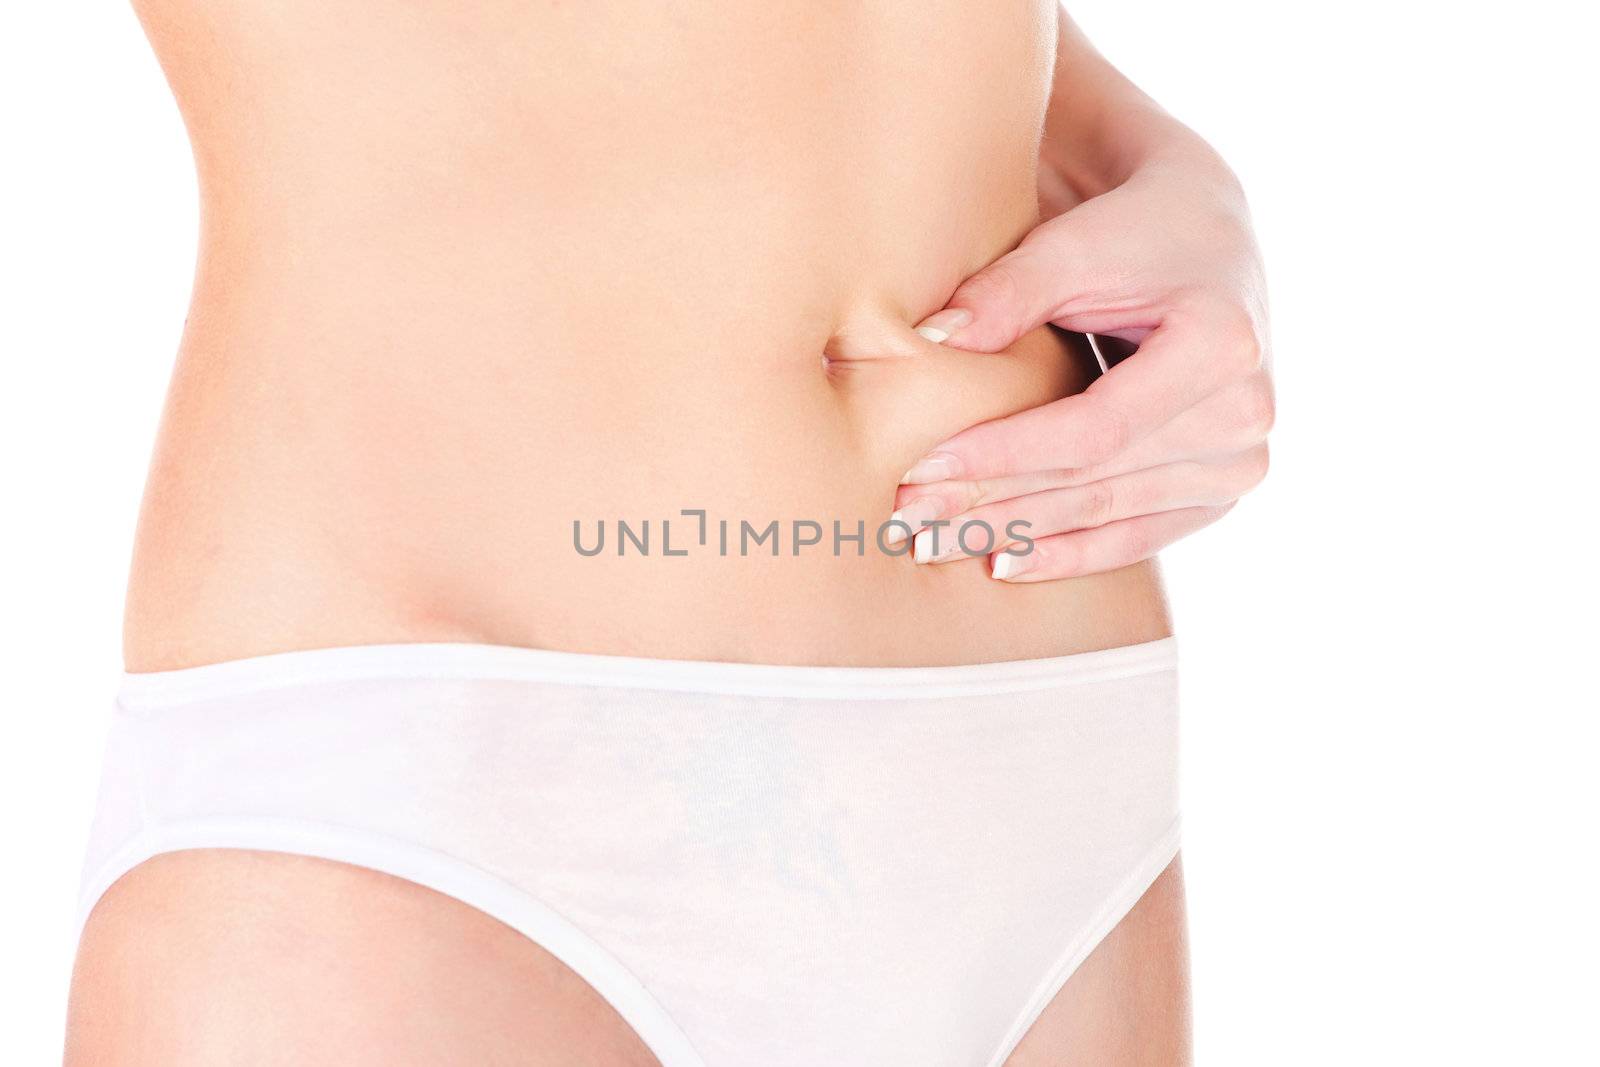 Woman pinching stomach for skin fold test by imarin